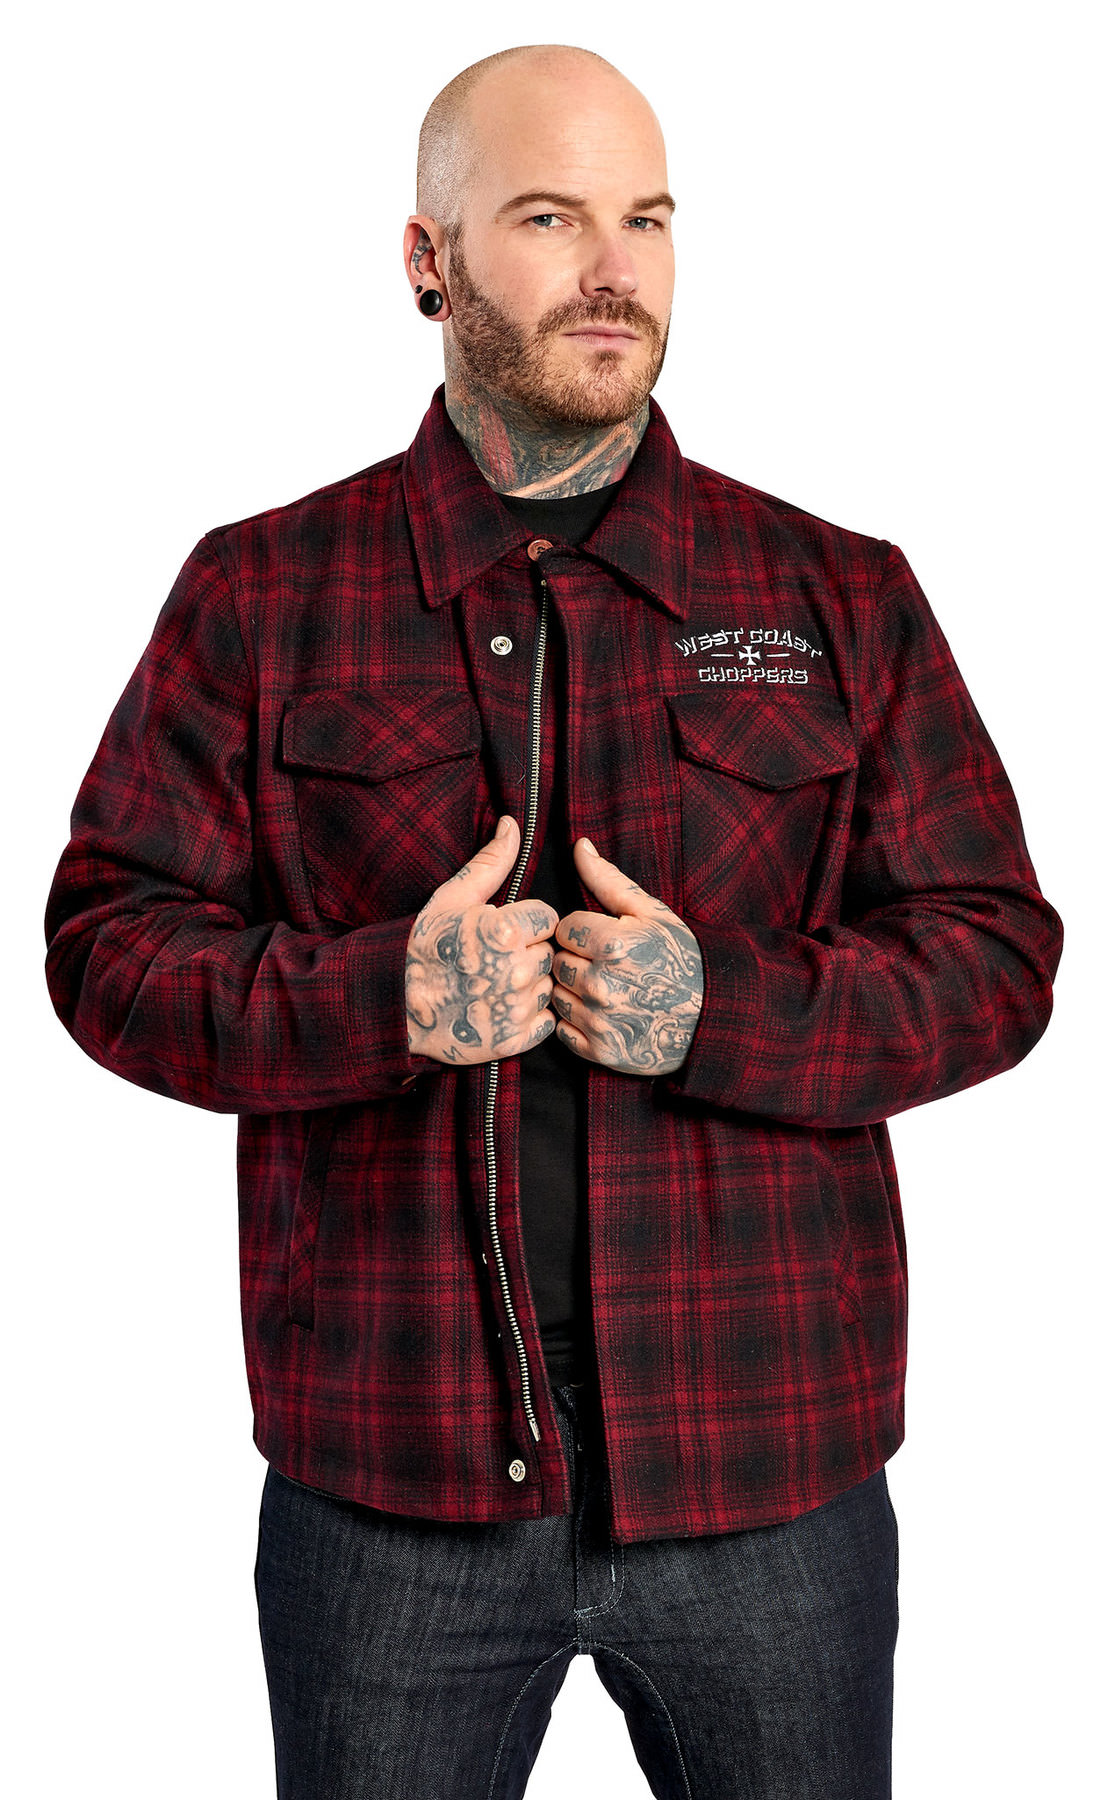 Buy West Coast Choppers Quilted Gang jacket | Louis motorcycle clothing and technology